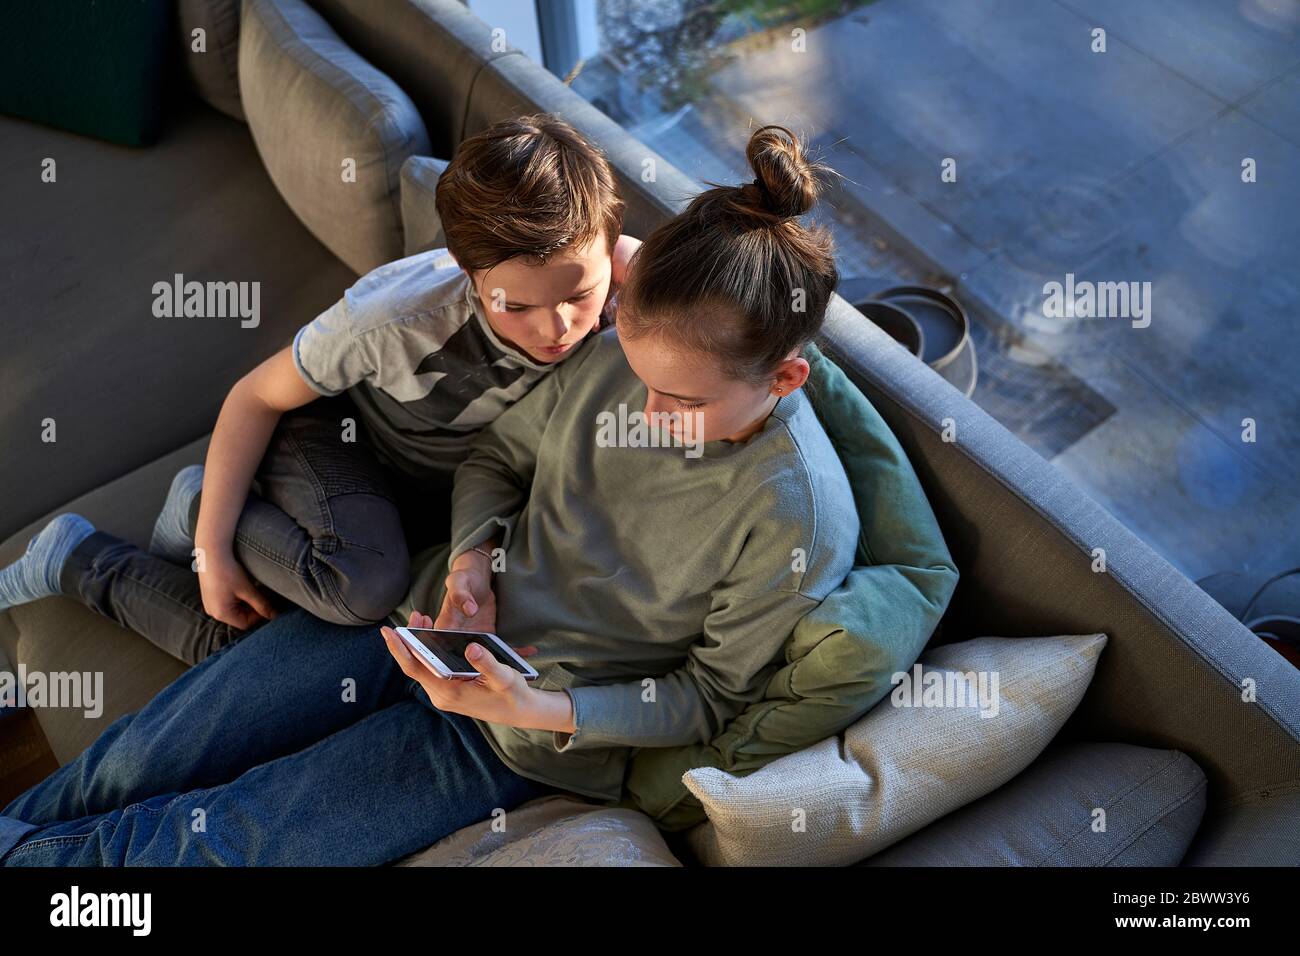 Brother and sister sitting on couch at home using smartphone Stock Photo